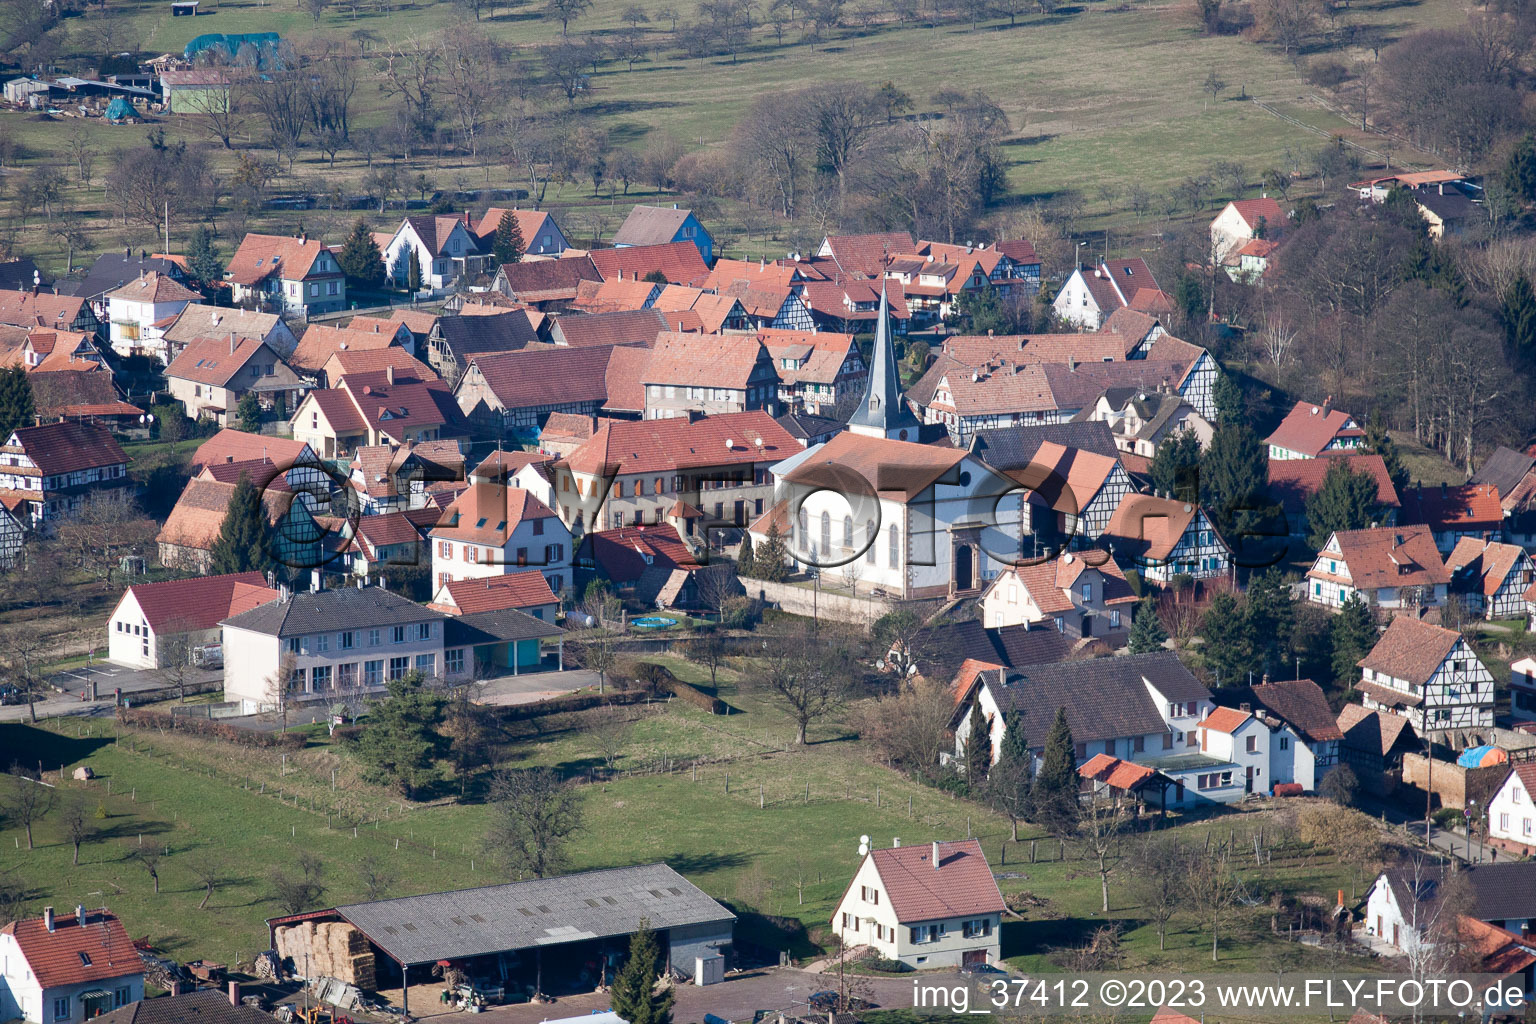 Lampertsloch in the state Bas-Rhin, France seen from above